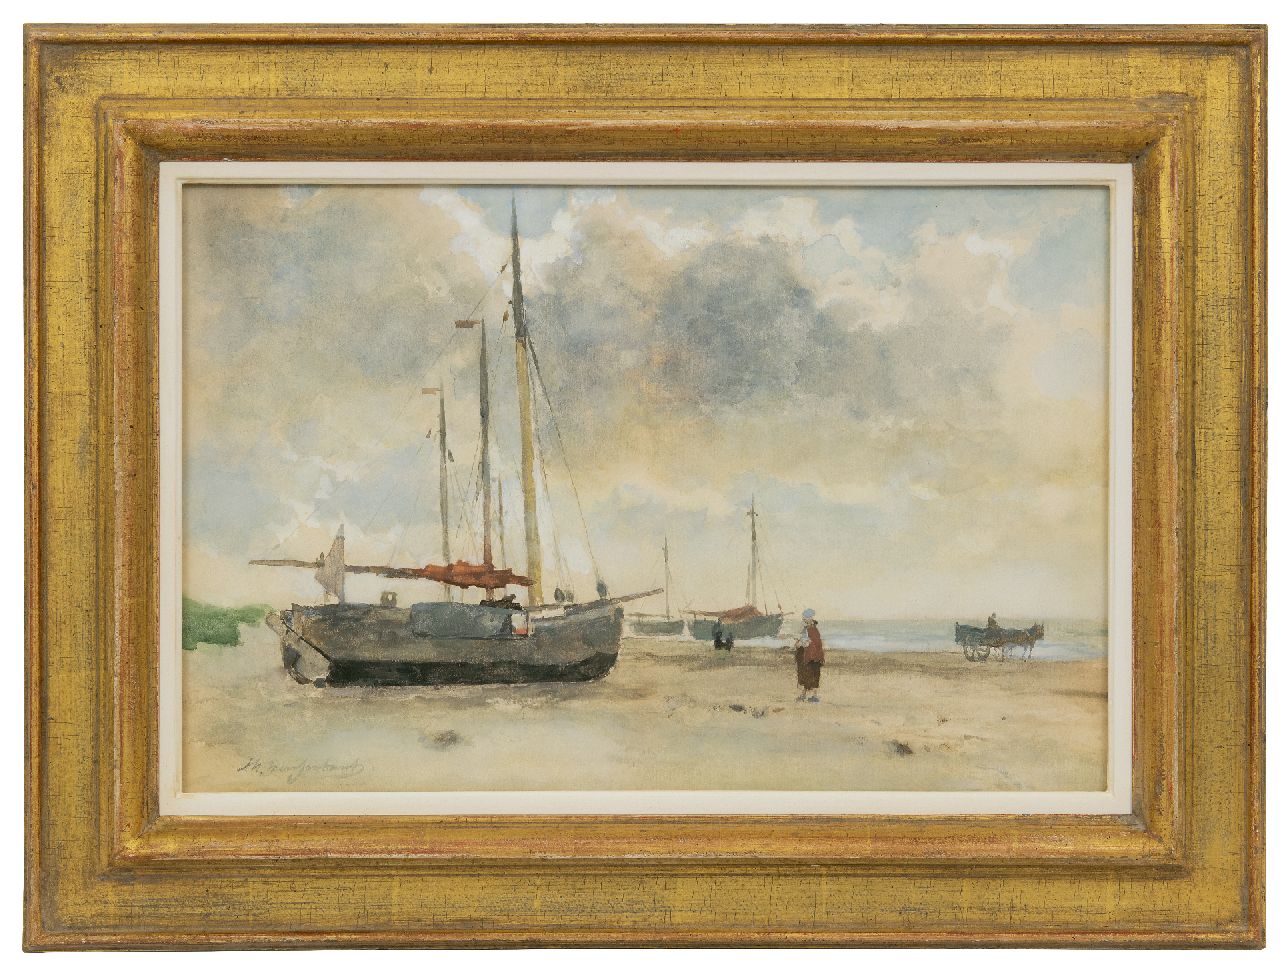 Weissenbruch H.J.  | Hendrik Johannes 'J.H.' Weissenbruch, Fishing boats on the beach, watercolour on paper 32.8 x 49.6 cm, signed l.l.